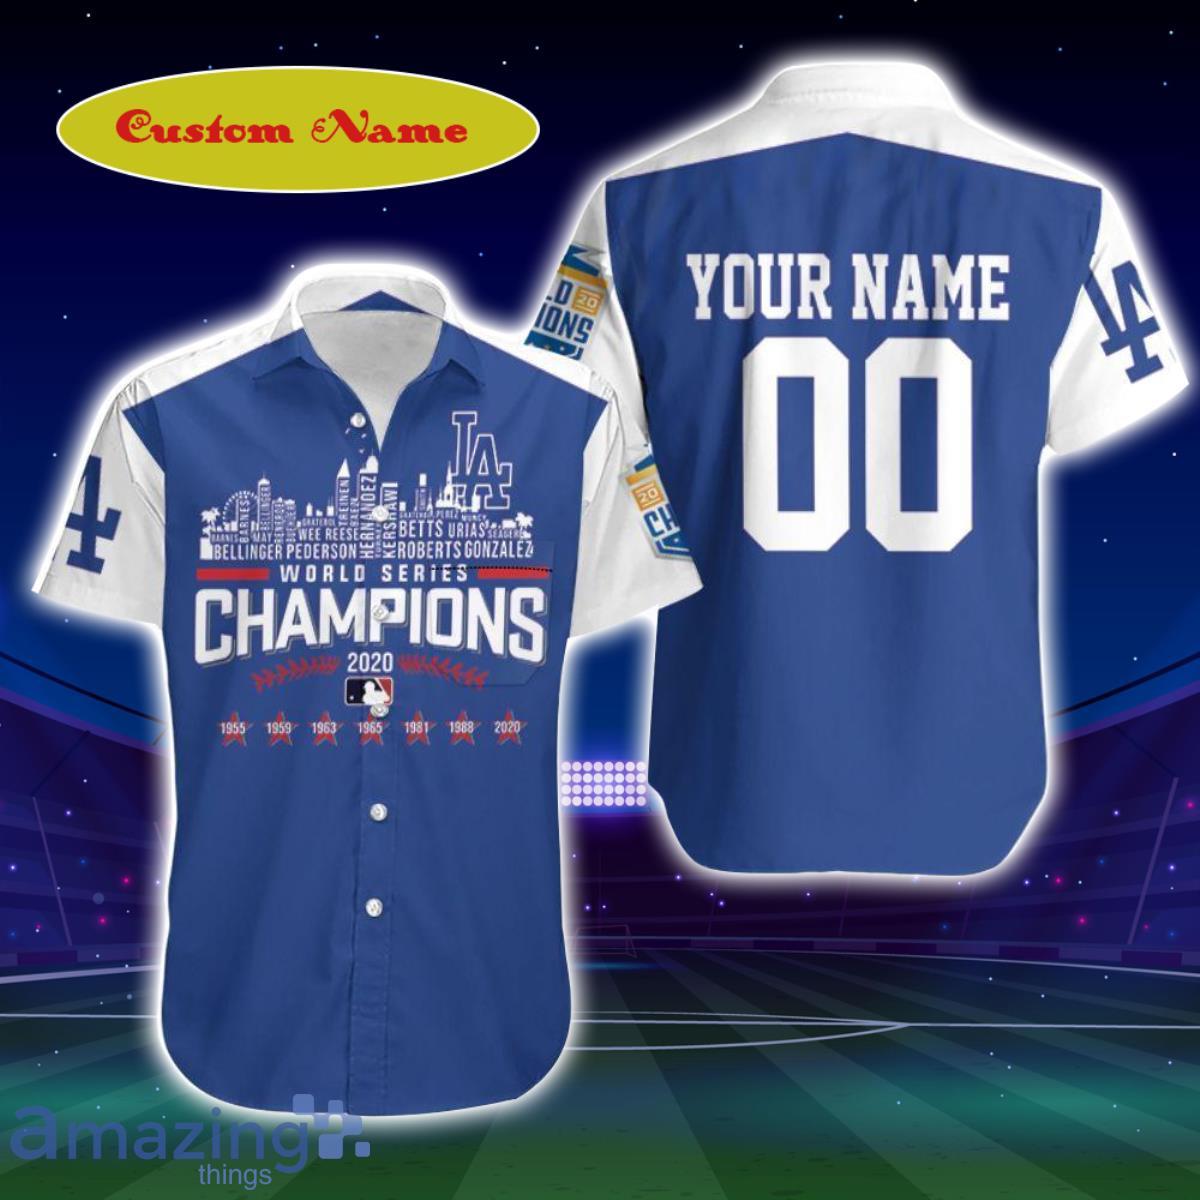 dodgers world series champs jersey